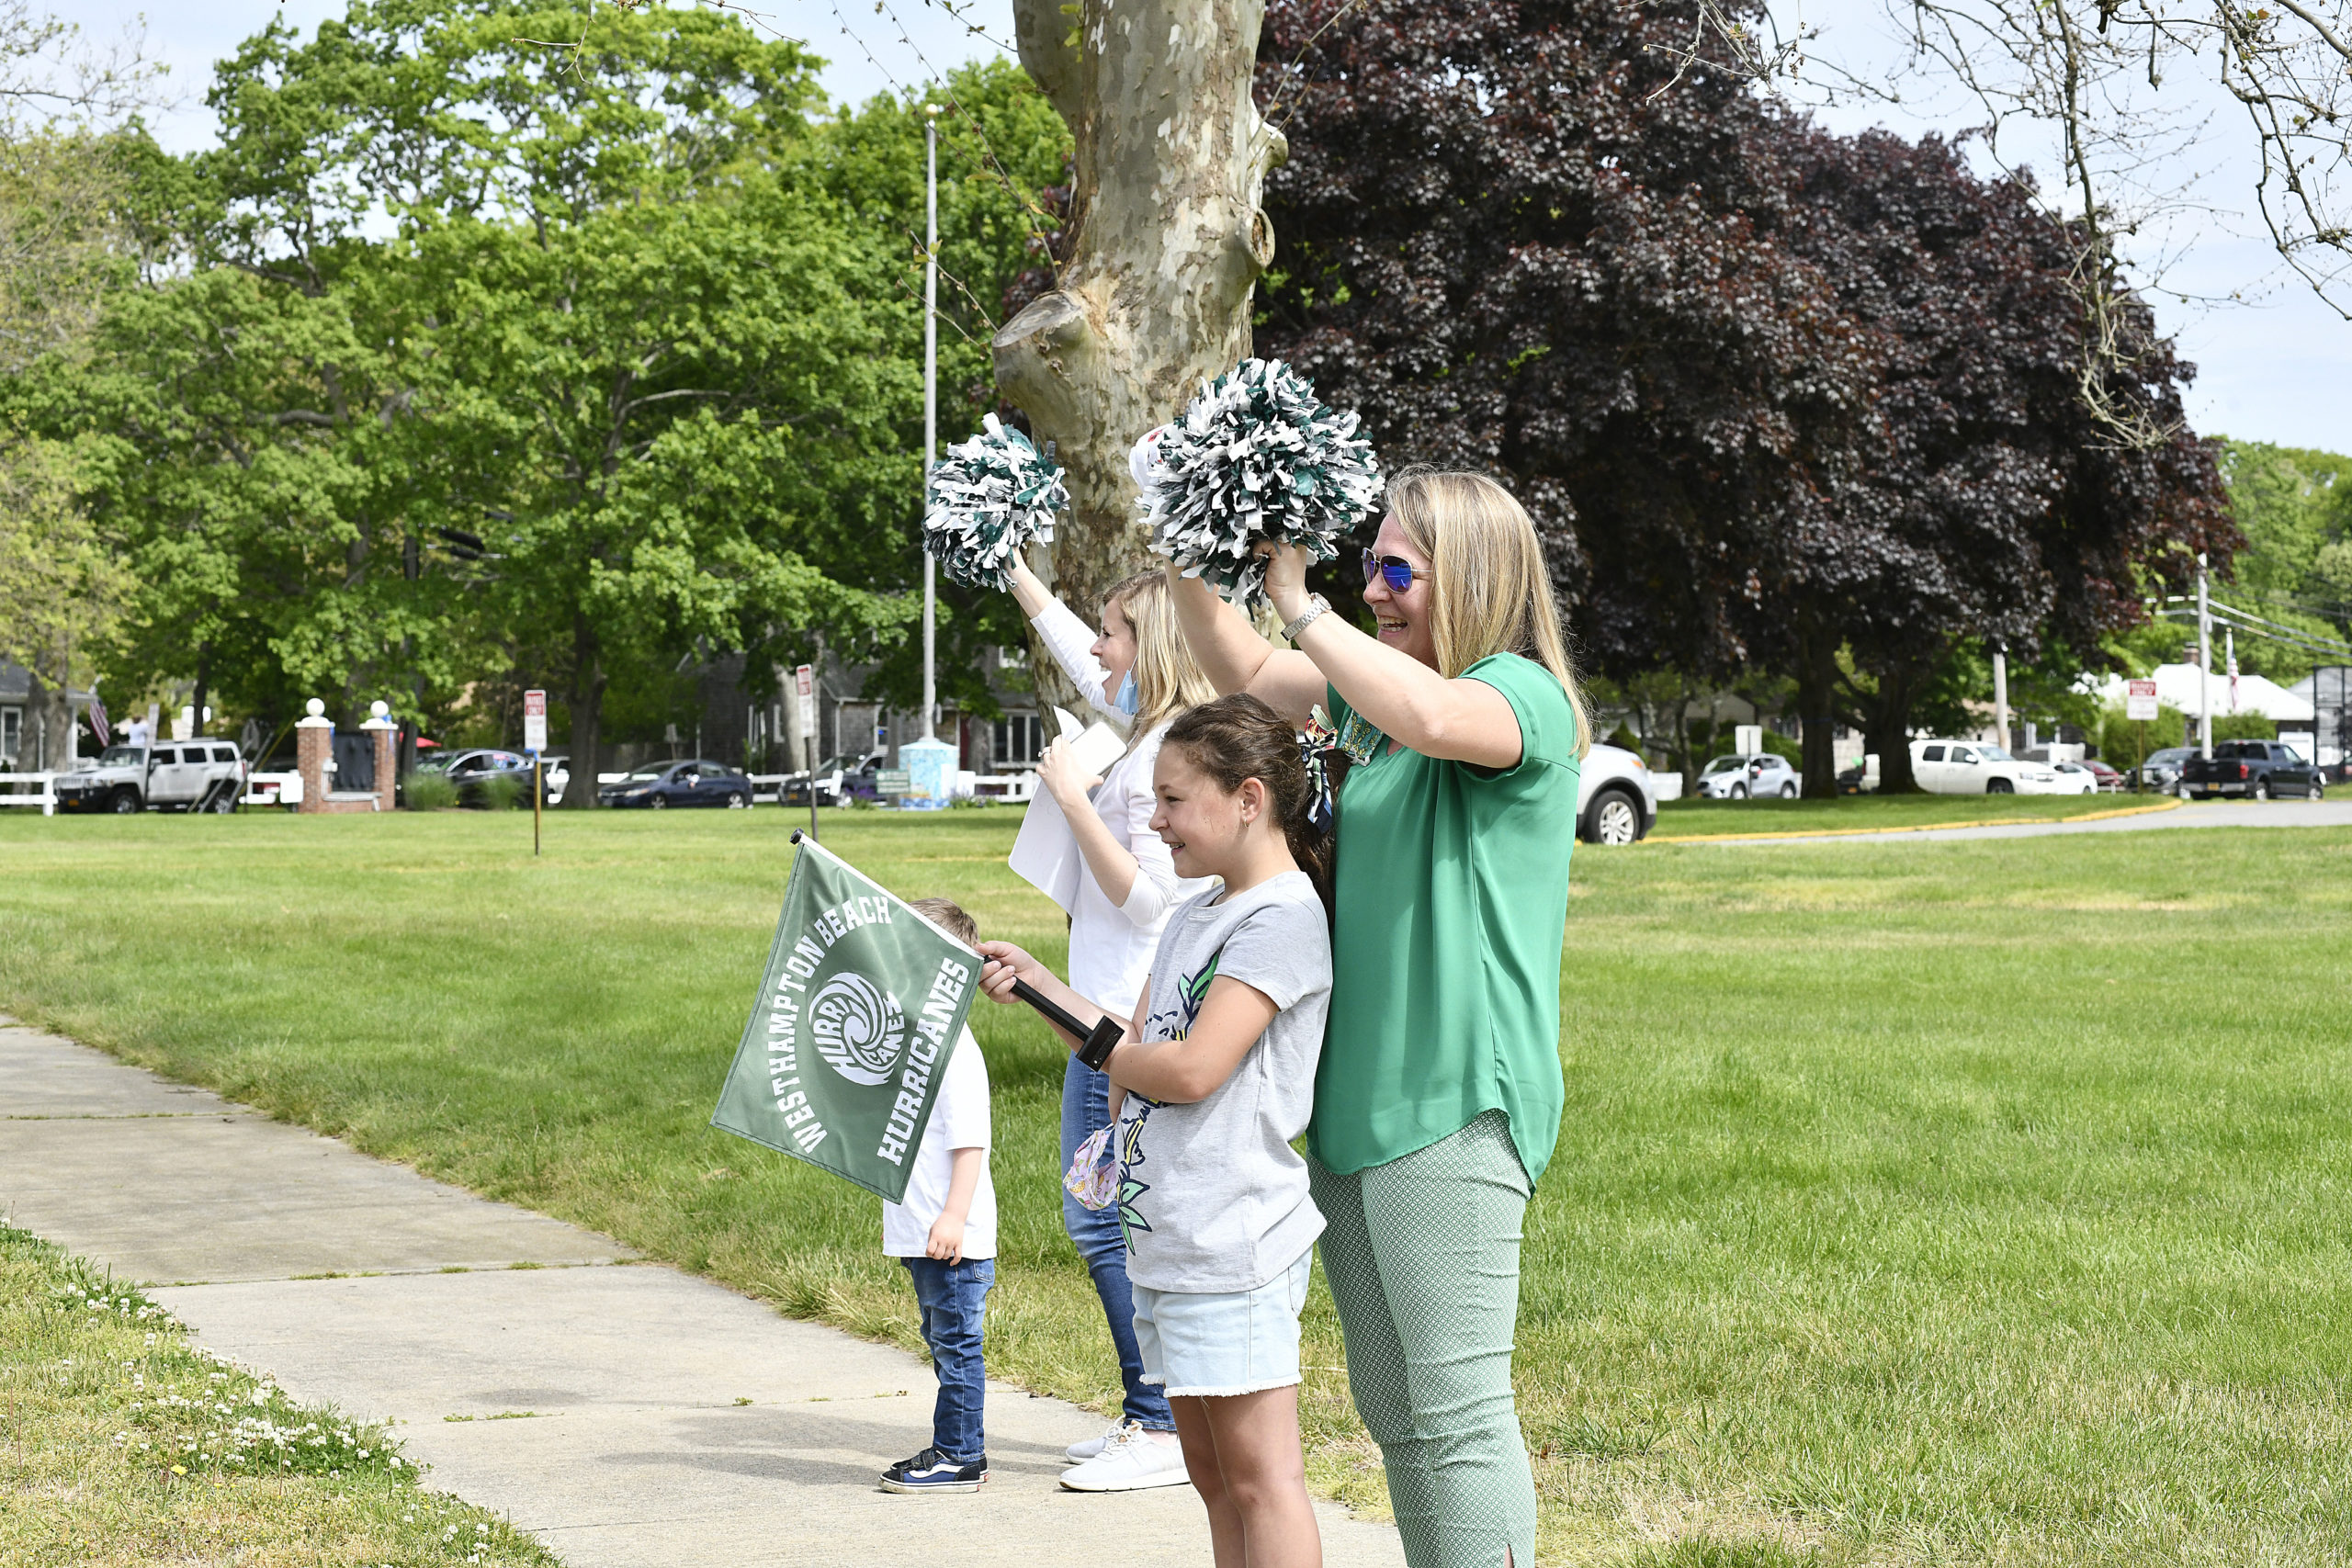 Westhampton Beach High School hosted the senior parade celebrating the Class of 2020 on Tuesday morning.